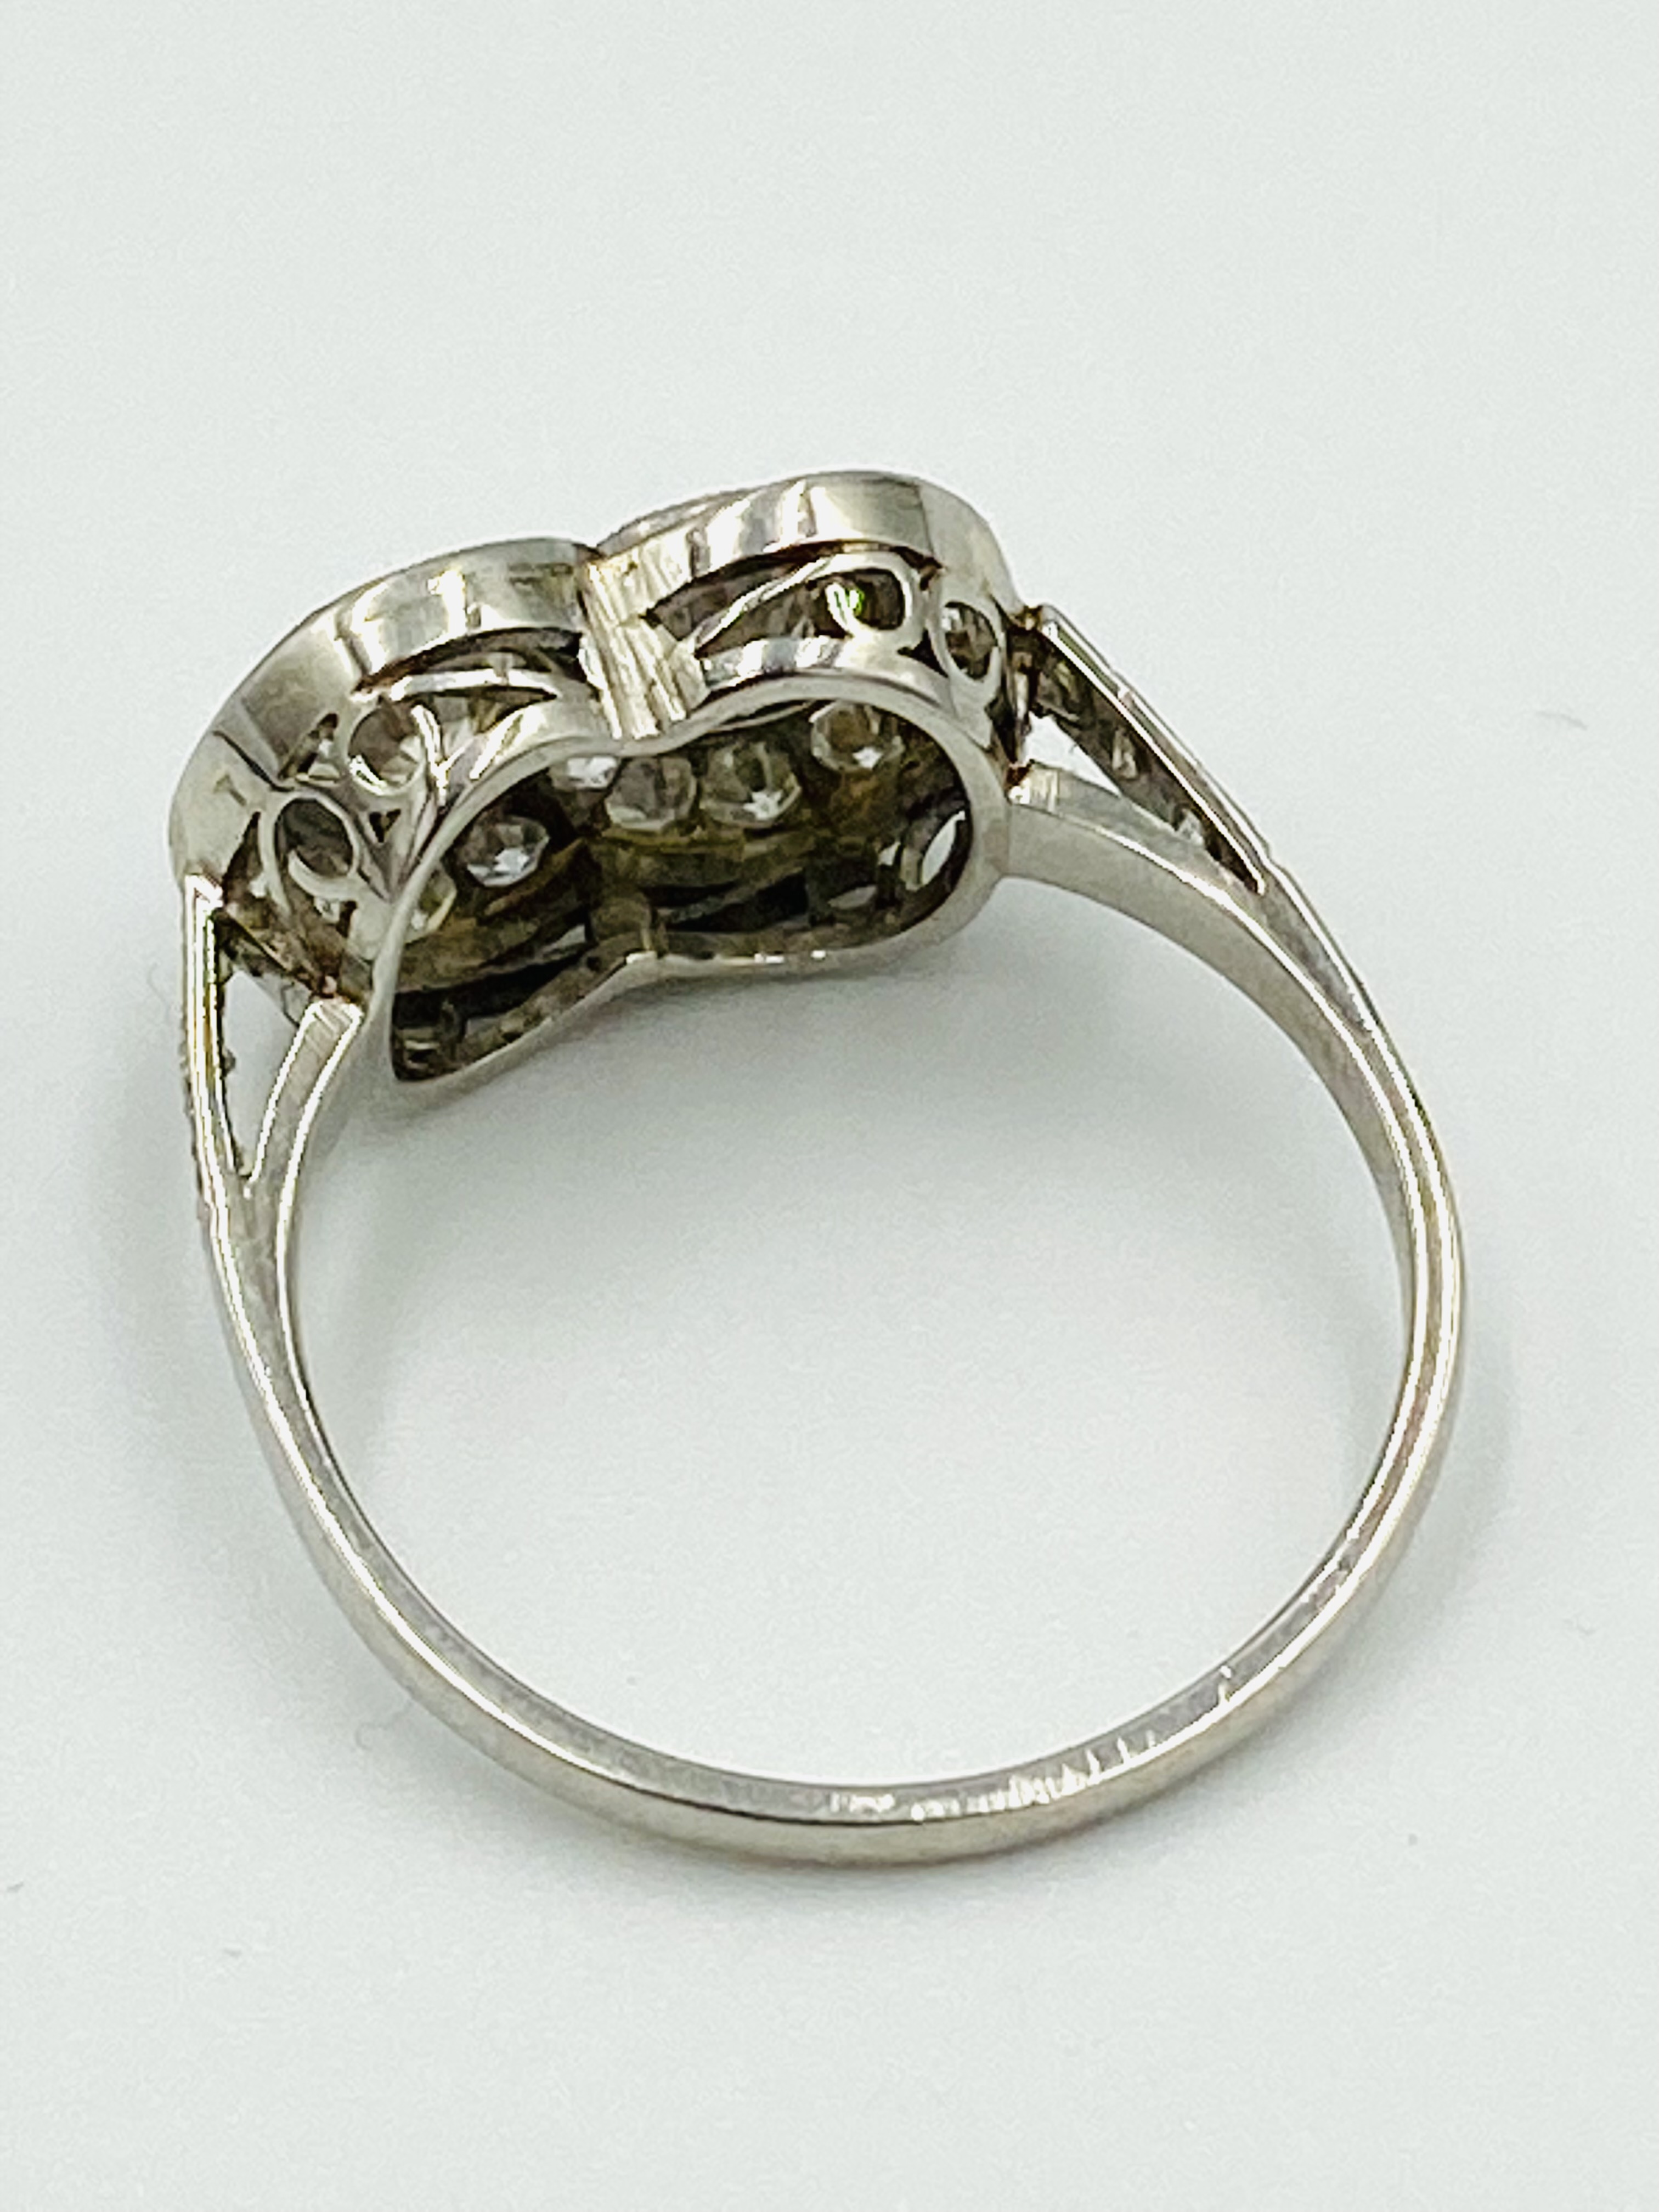 18ct white gold and diamond ring - Image 4 of 4